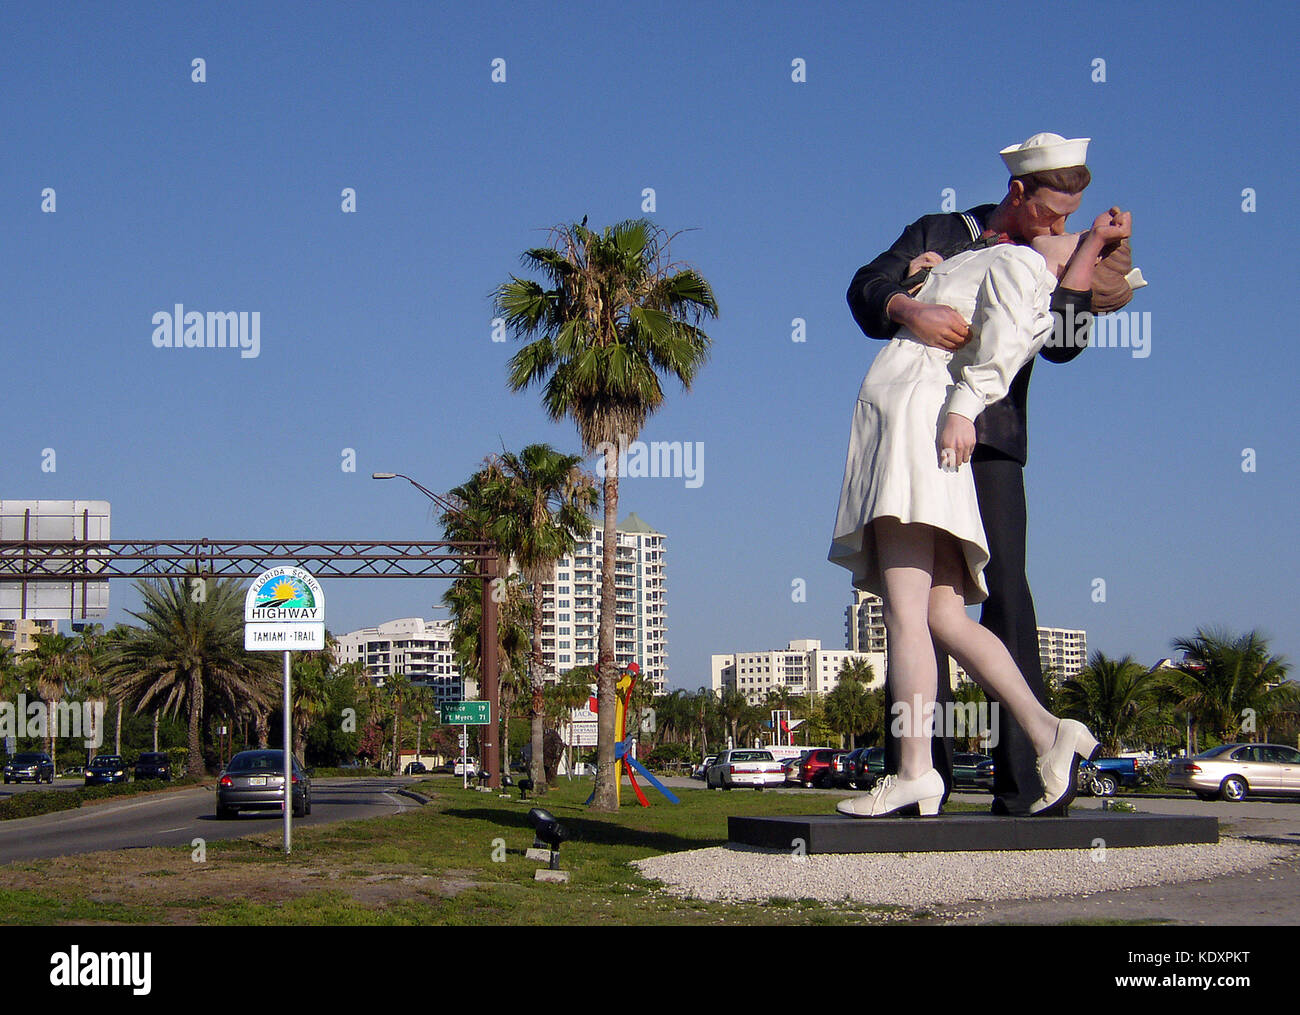 “Unconditional Surrender” is a painted aluiminum sculpture by J. Seward Johnson that is modeled after a famous photograph of a U.S. Navy sailor kissing a nurse in New York City’s Times Square during the VJ Day parade on August 14, 1945, which celebrated the surrender of Japan and the end of  World War II. The 25-foot-tall statue is on permanent display in Bayfront Park in Sarasota, Florida, USA. Stock Photo